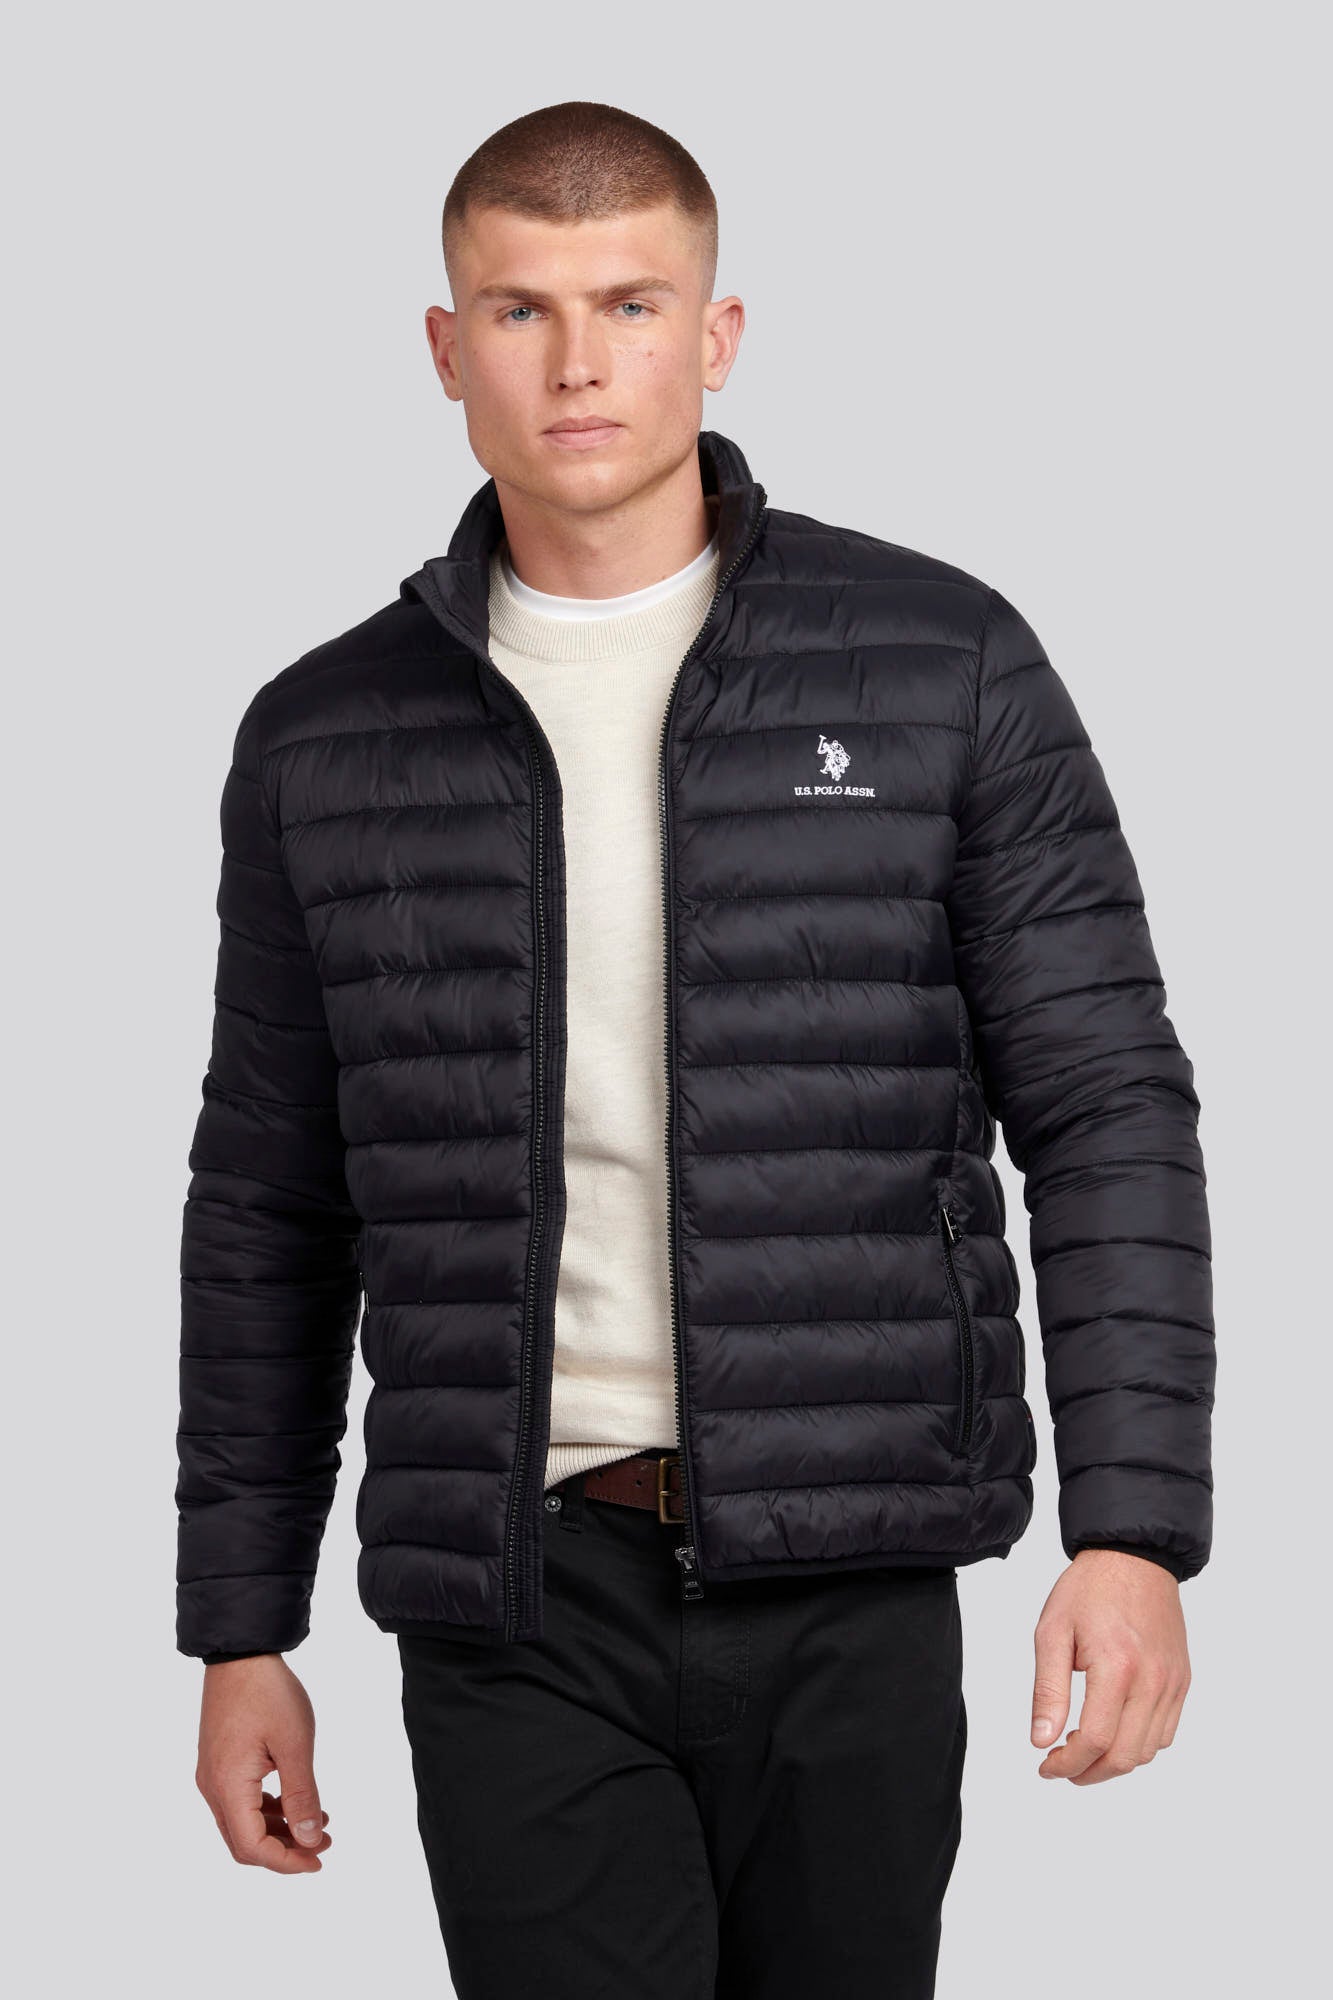 U.S. Polo Assn. Mens Lightweight Bound Quilted Jacket in Black Bright White DHM